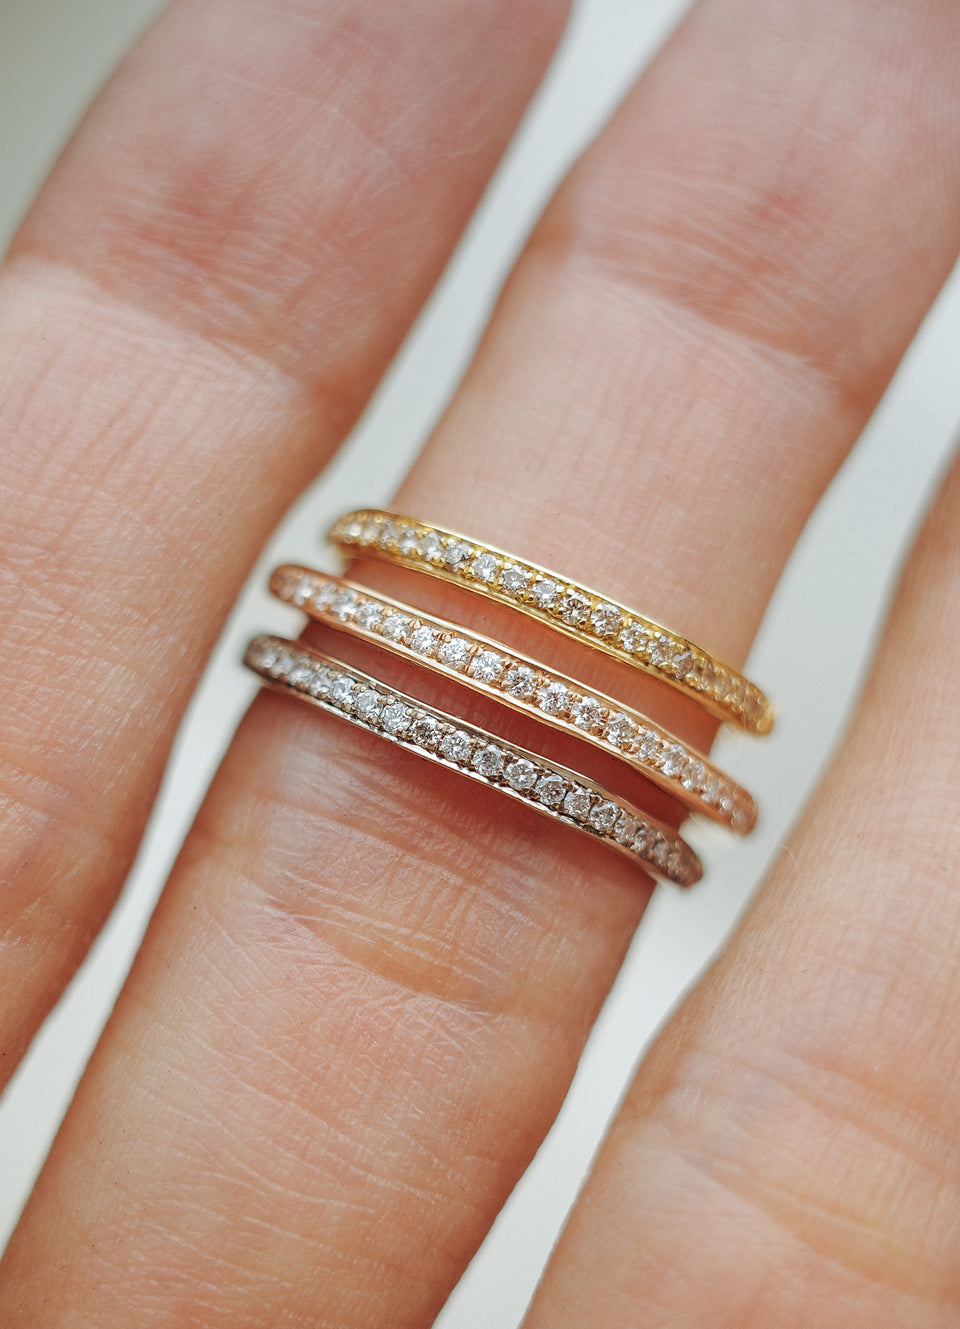 Bands II - Pavé Ring